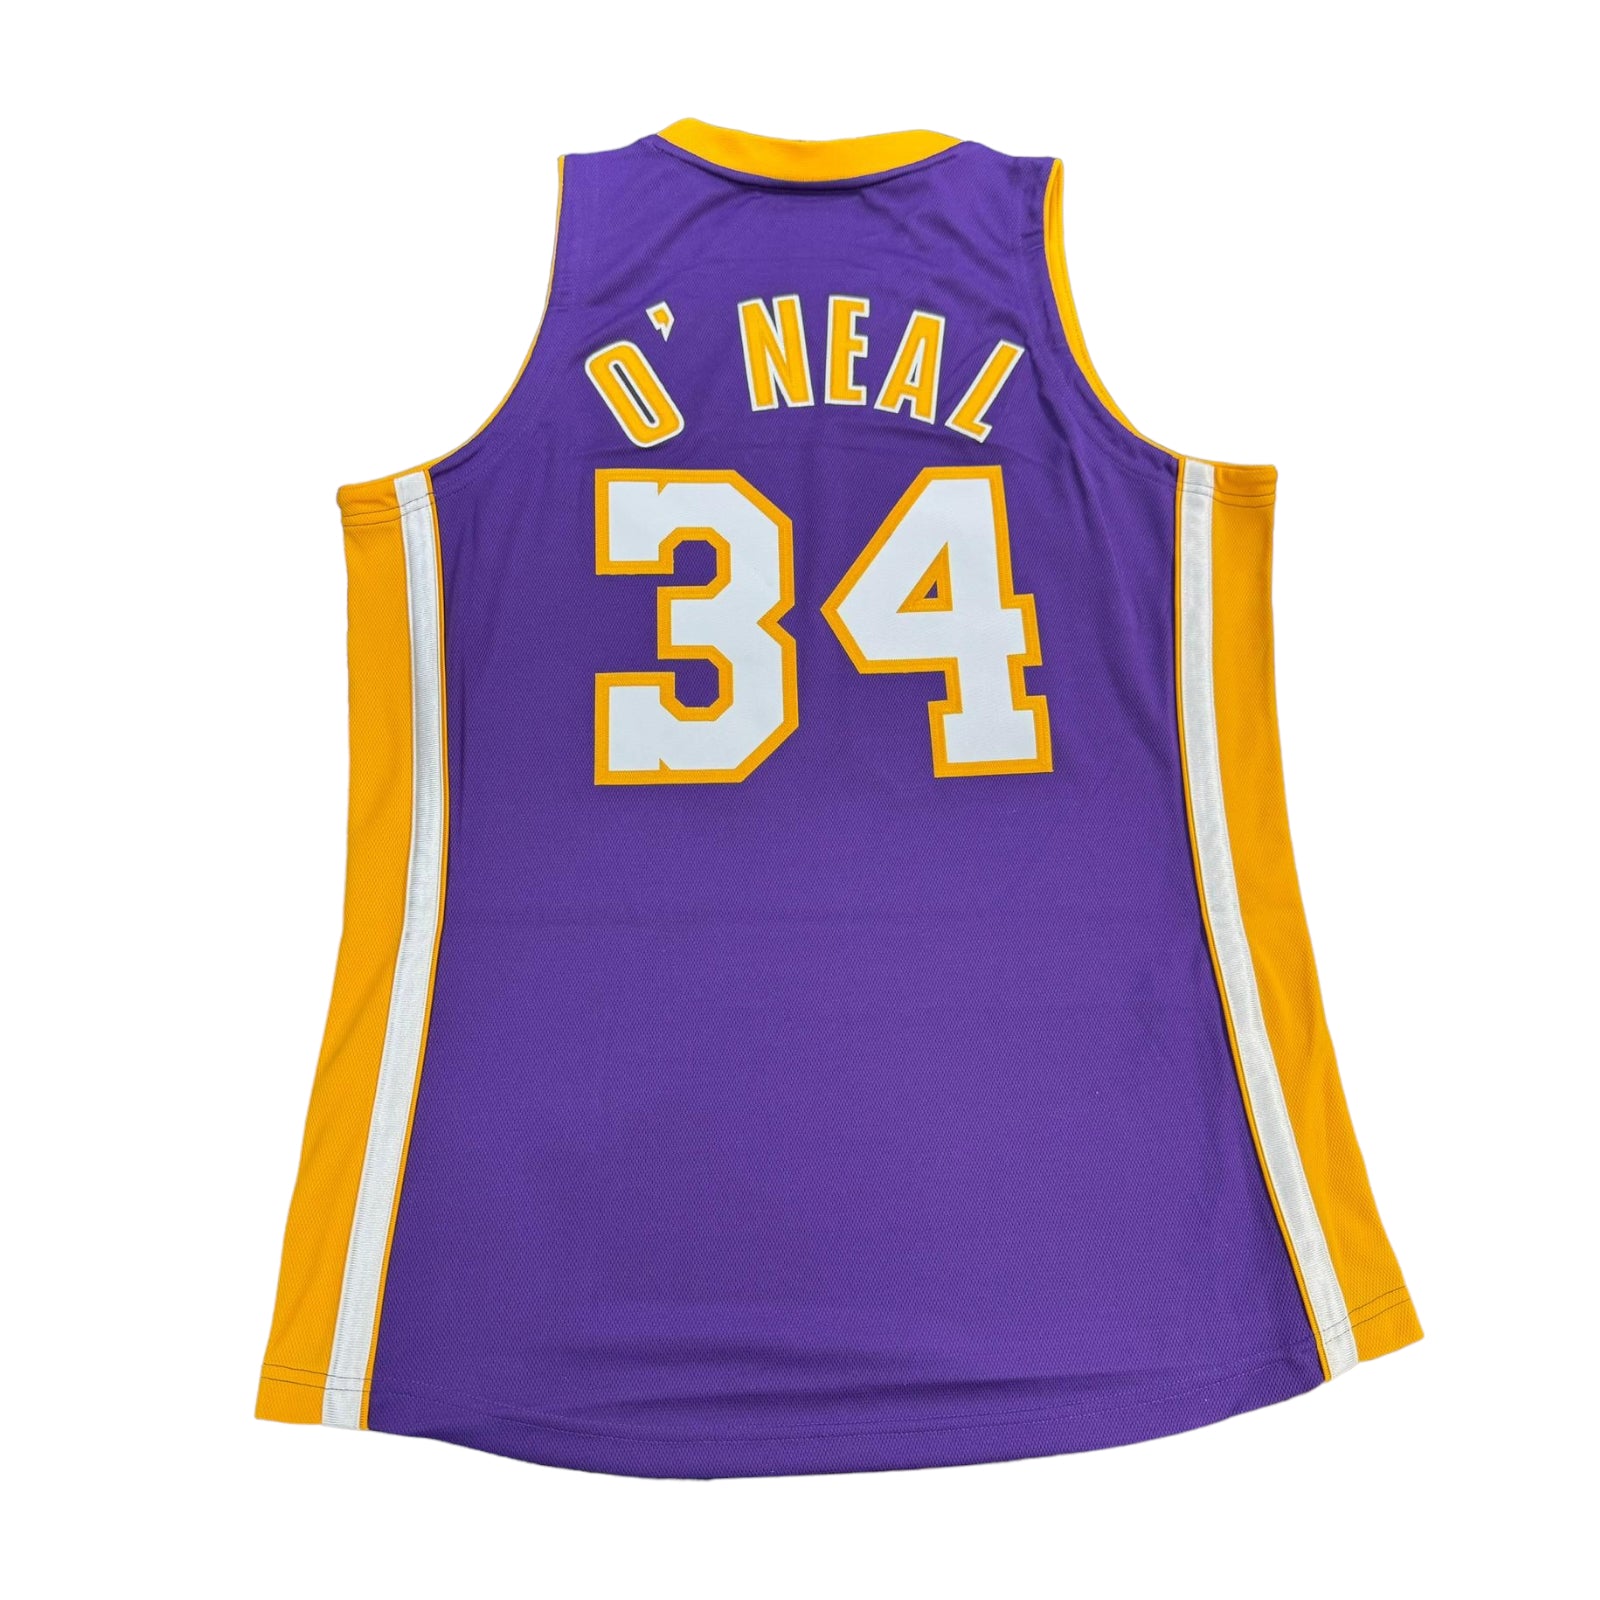 Mitchell&Ness Shaquille O'Neal Los Angeles Lakers 1999-2000 Hardwood Classic Away Authentic Jersey